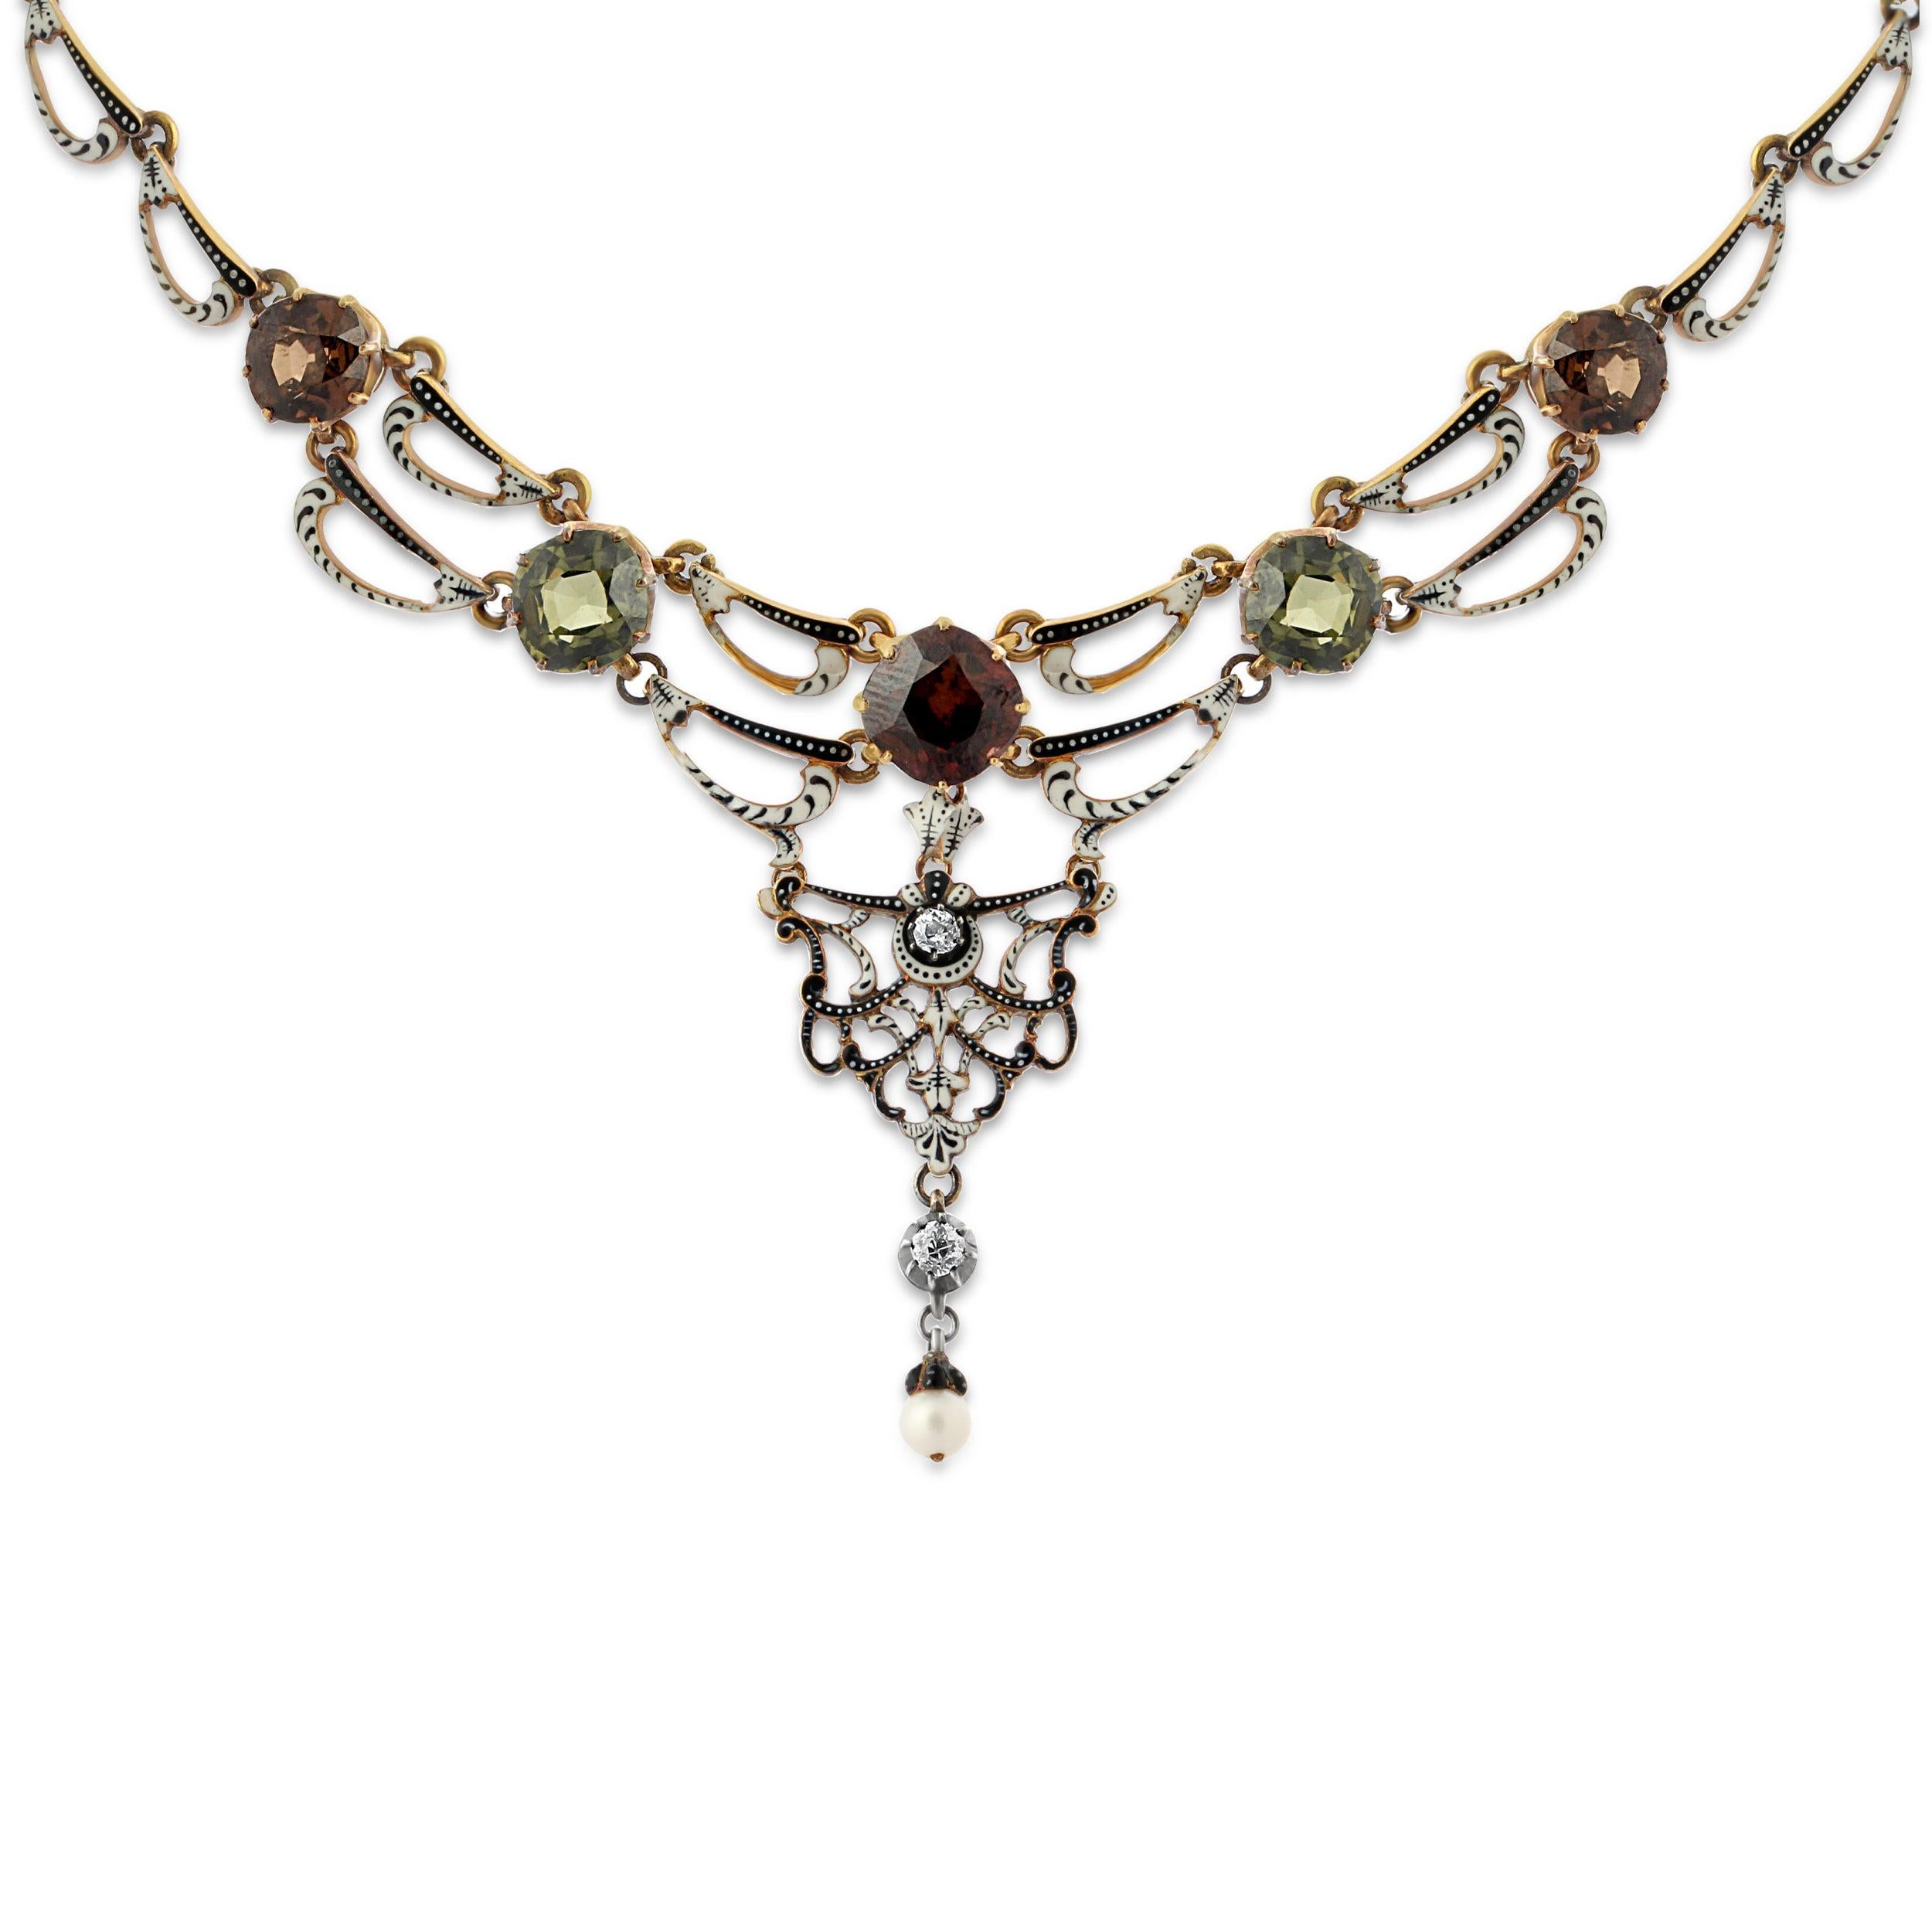 A renaissance revival gold, enamel and gem set necklace by Carlo Giuliano. A stunning openwork scroll design with black and white enamel details mounted on gold with five green and orange-brown cushion-cut zircons. The central drop is set with